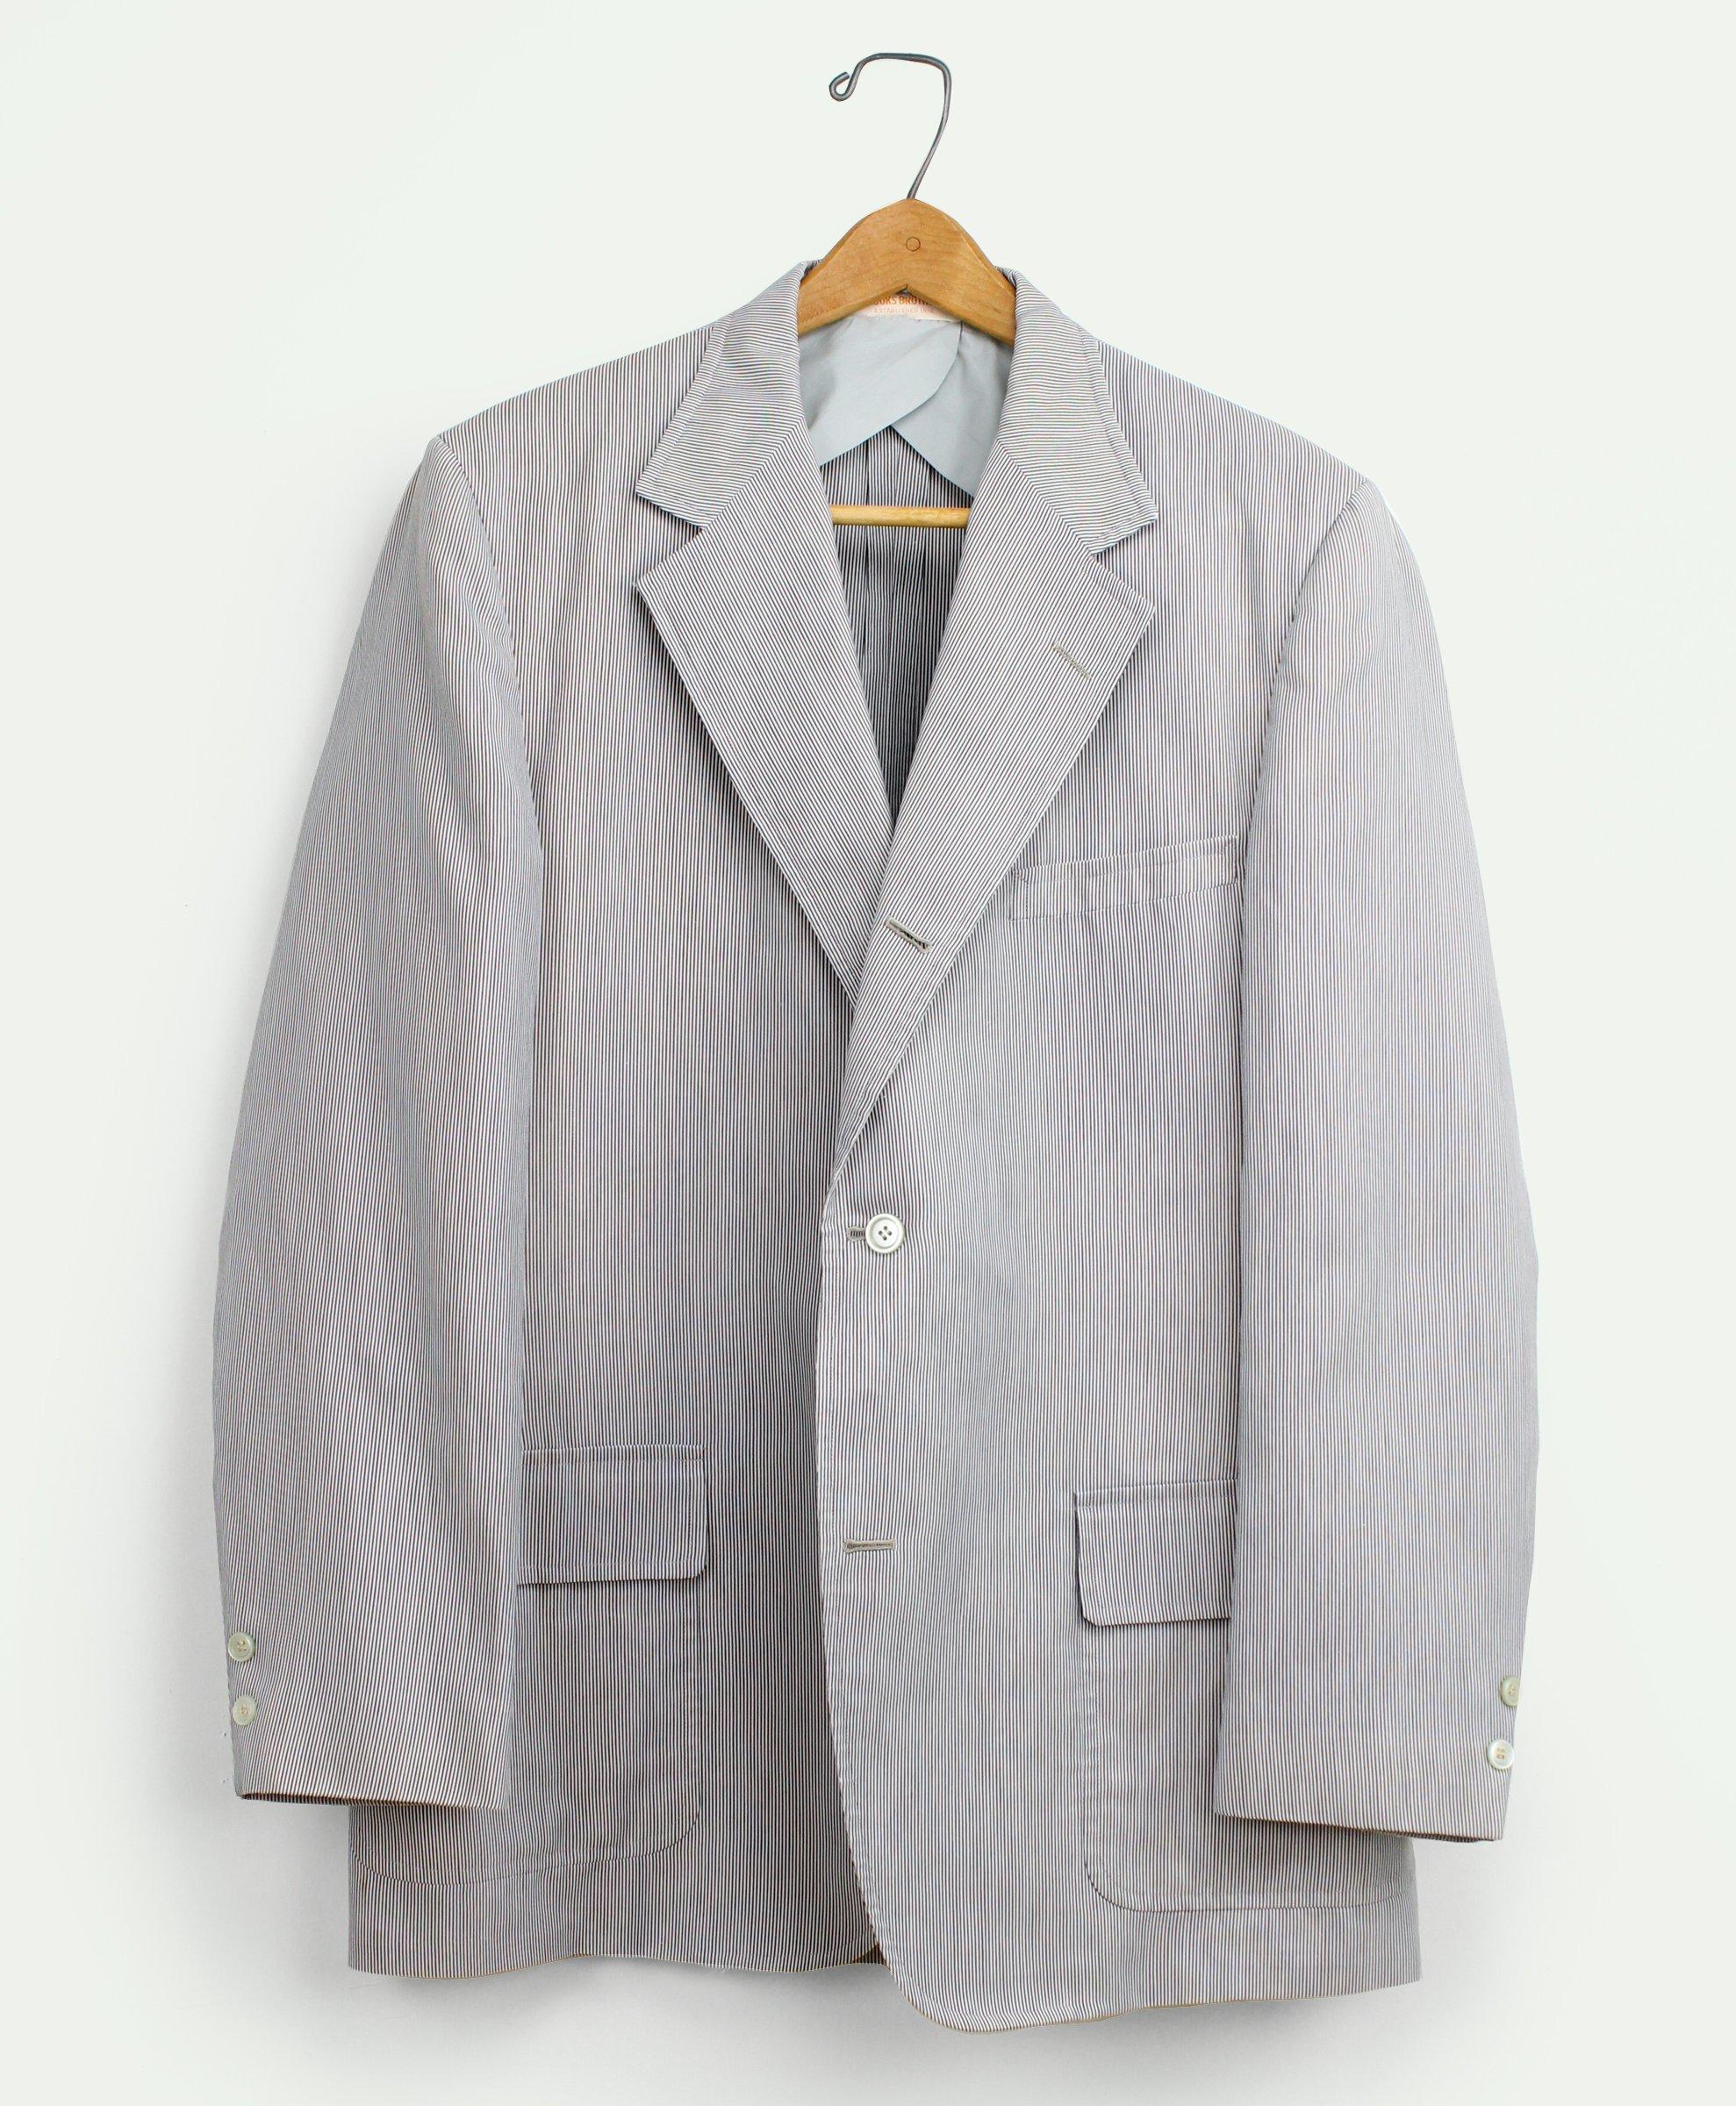 Vintage Whipcord Wash & Wear Suit, 1970s, 44